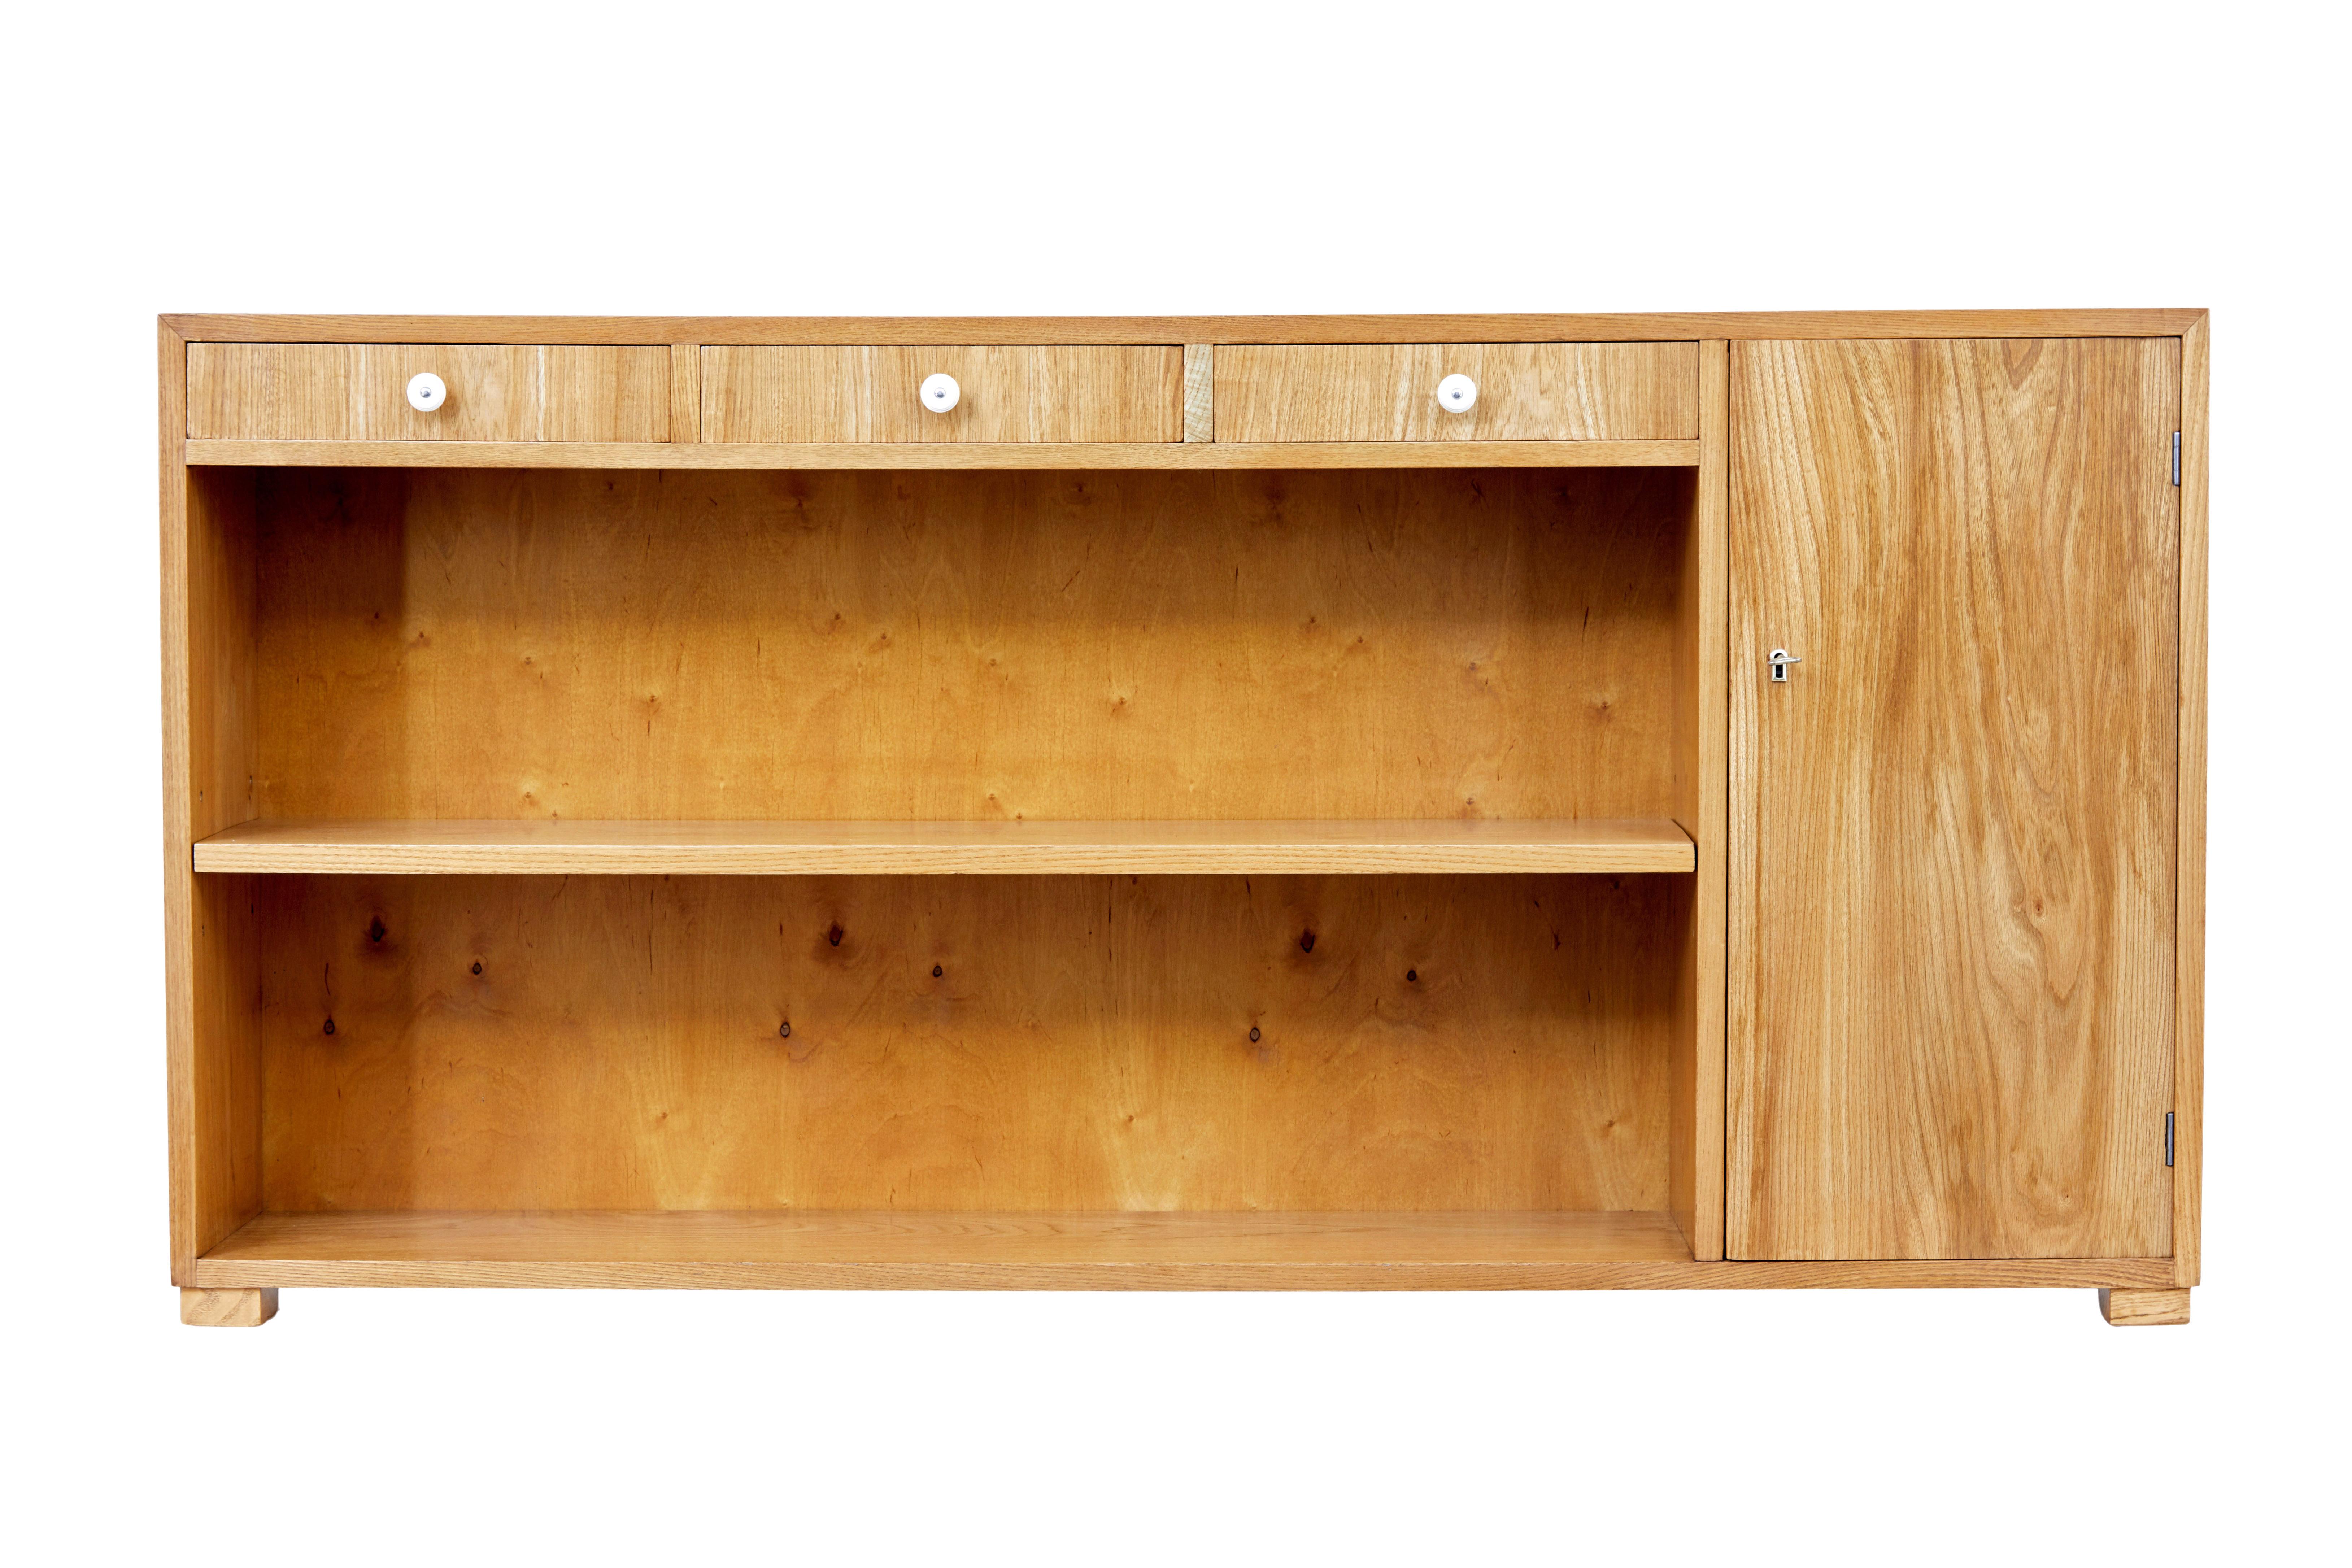 Scandinavian mid 20th century low elm bookcase circa 1950.

Good quality low open bookcase which is ideal for those smaller spaces.

Veneered in elm, rectangular shaped and only 10 inches deep.  3 drawers below the top surface each fitted with a